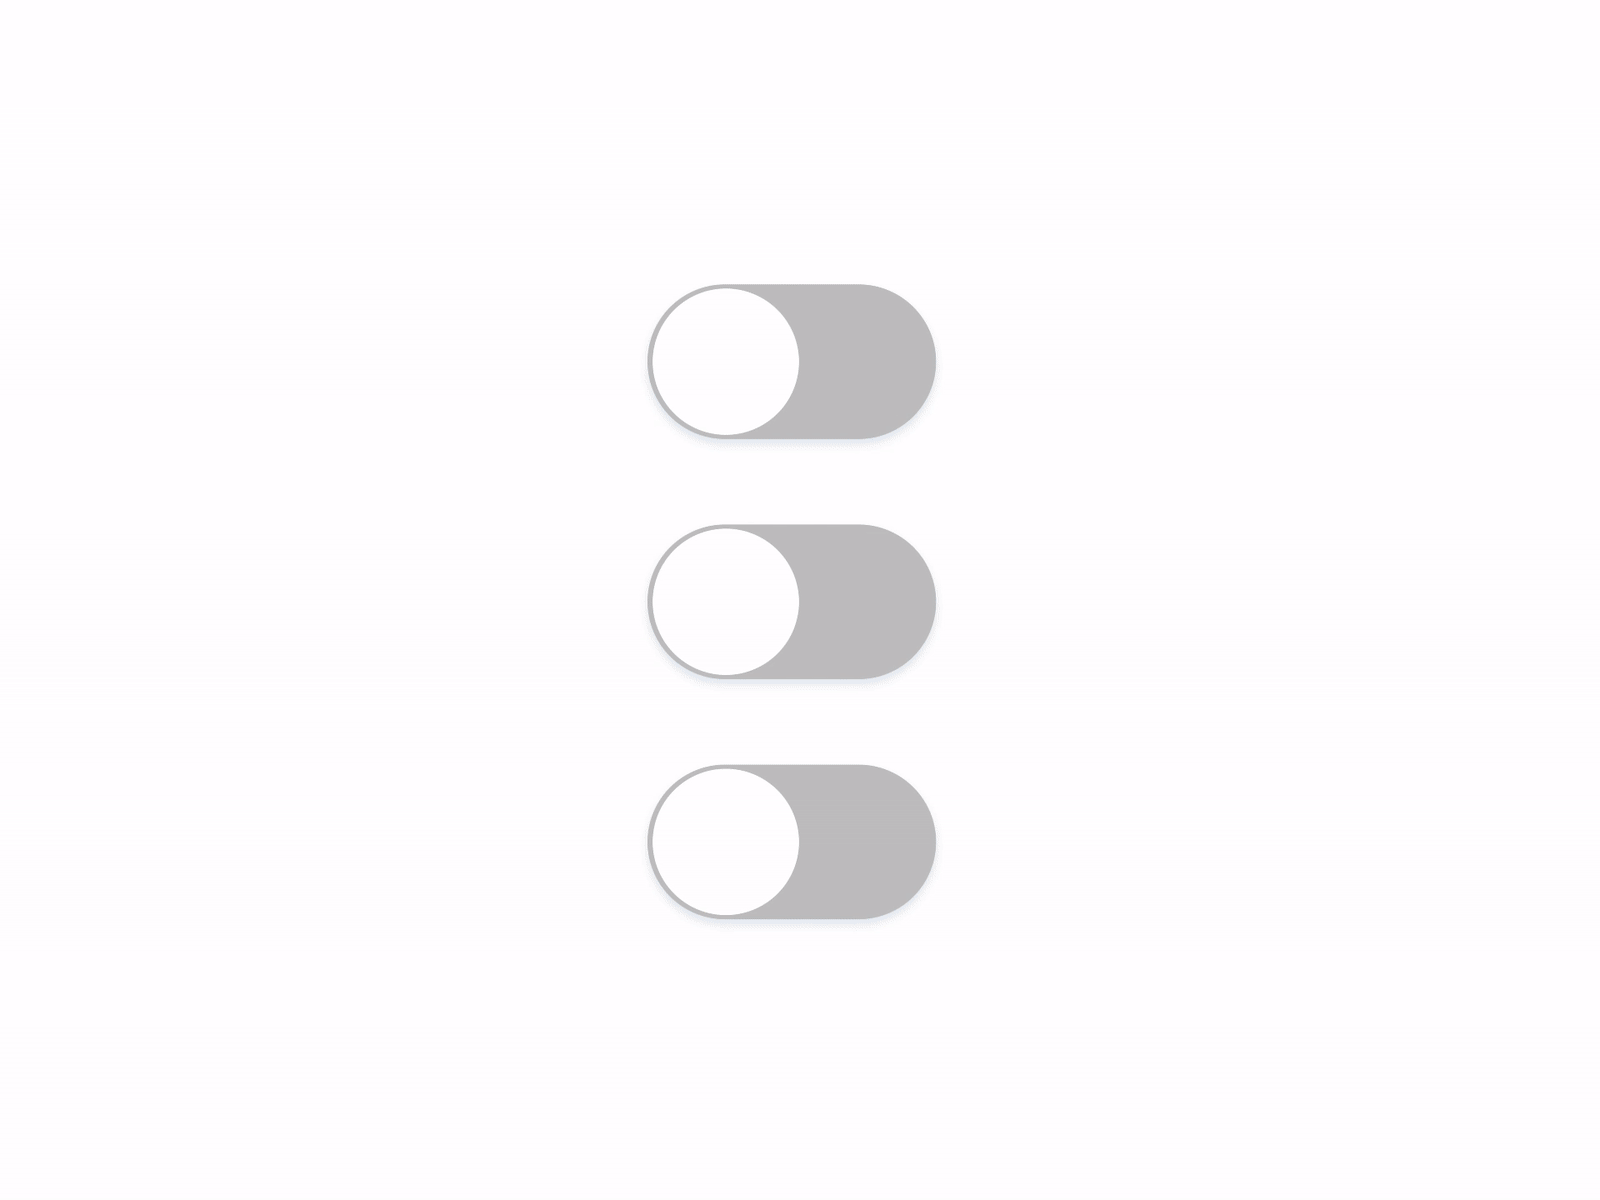 Scenery On/Off Switch | DailyUI #015 button dailyui design illustration switch toggle ui